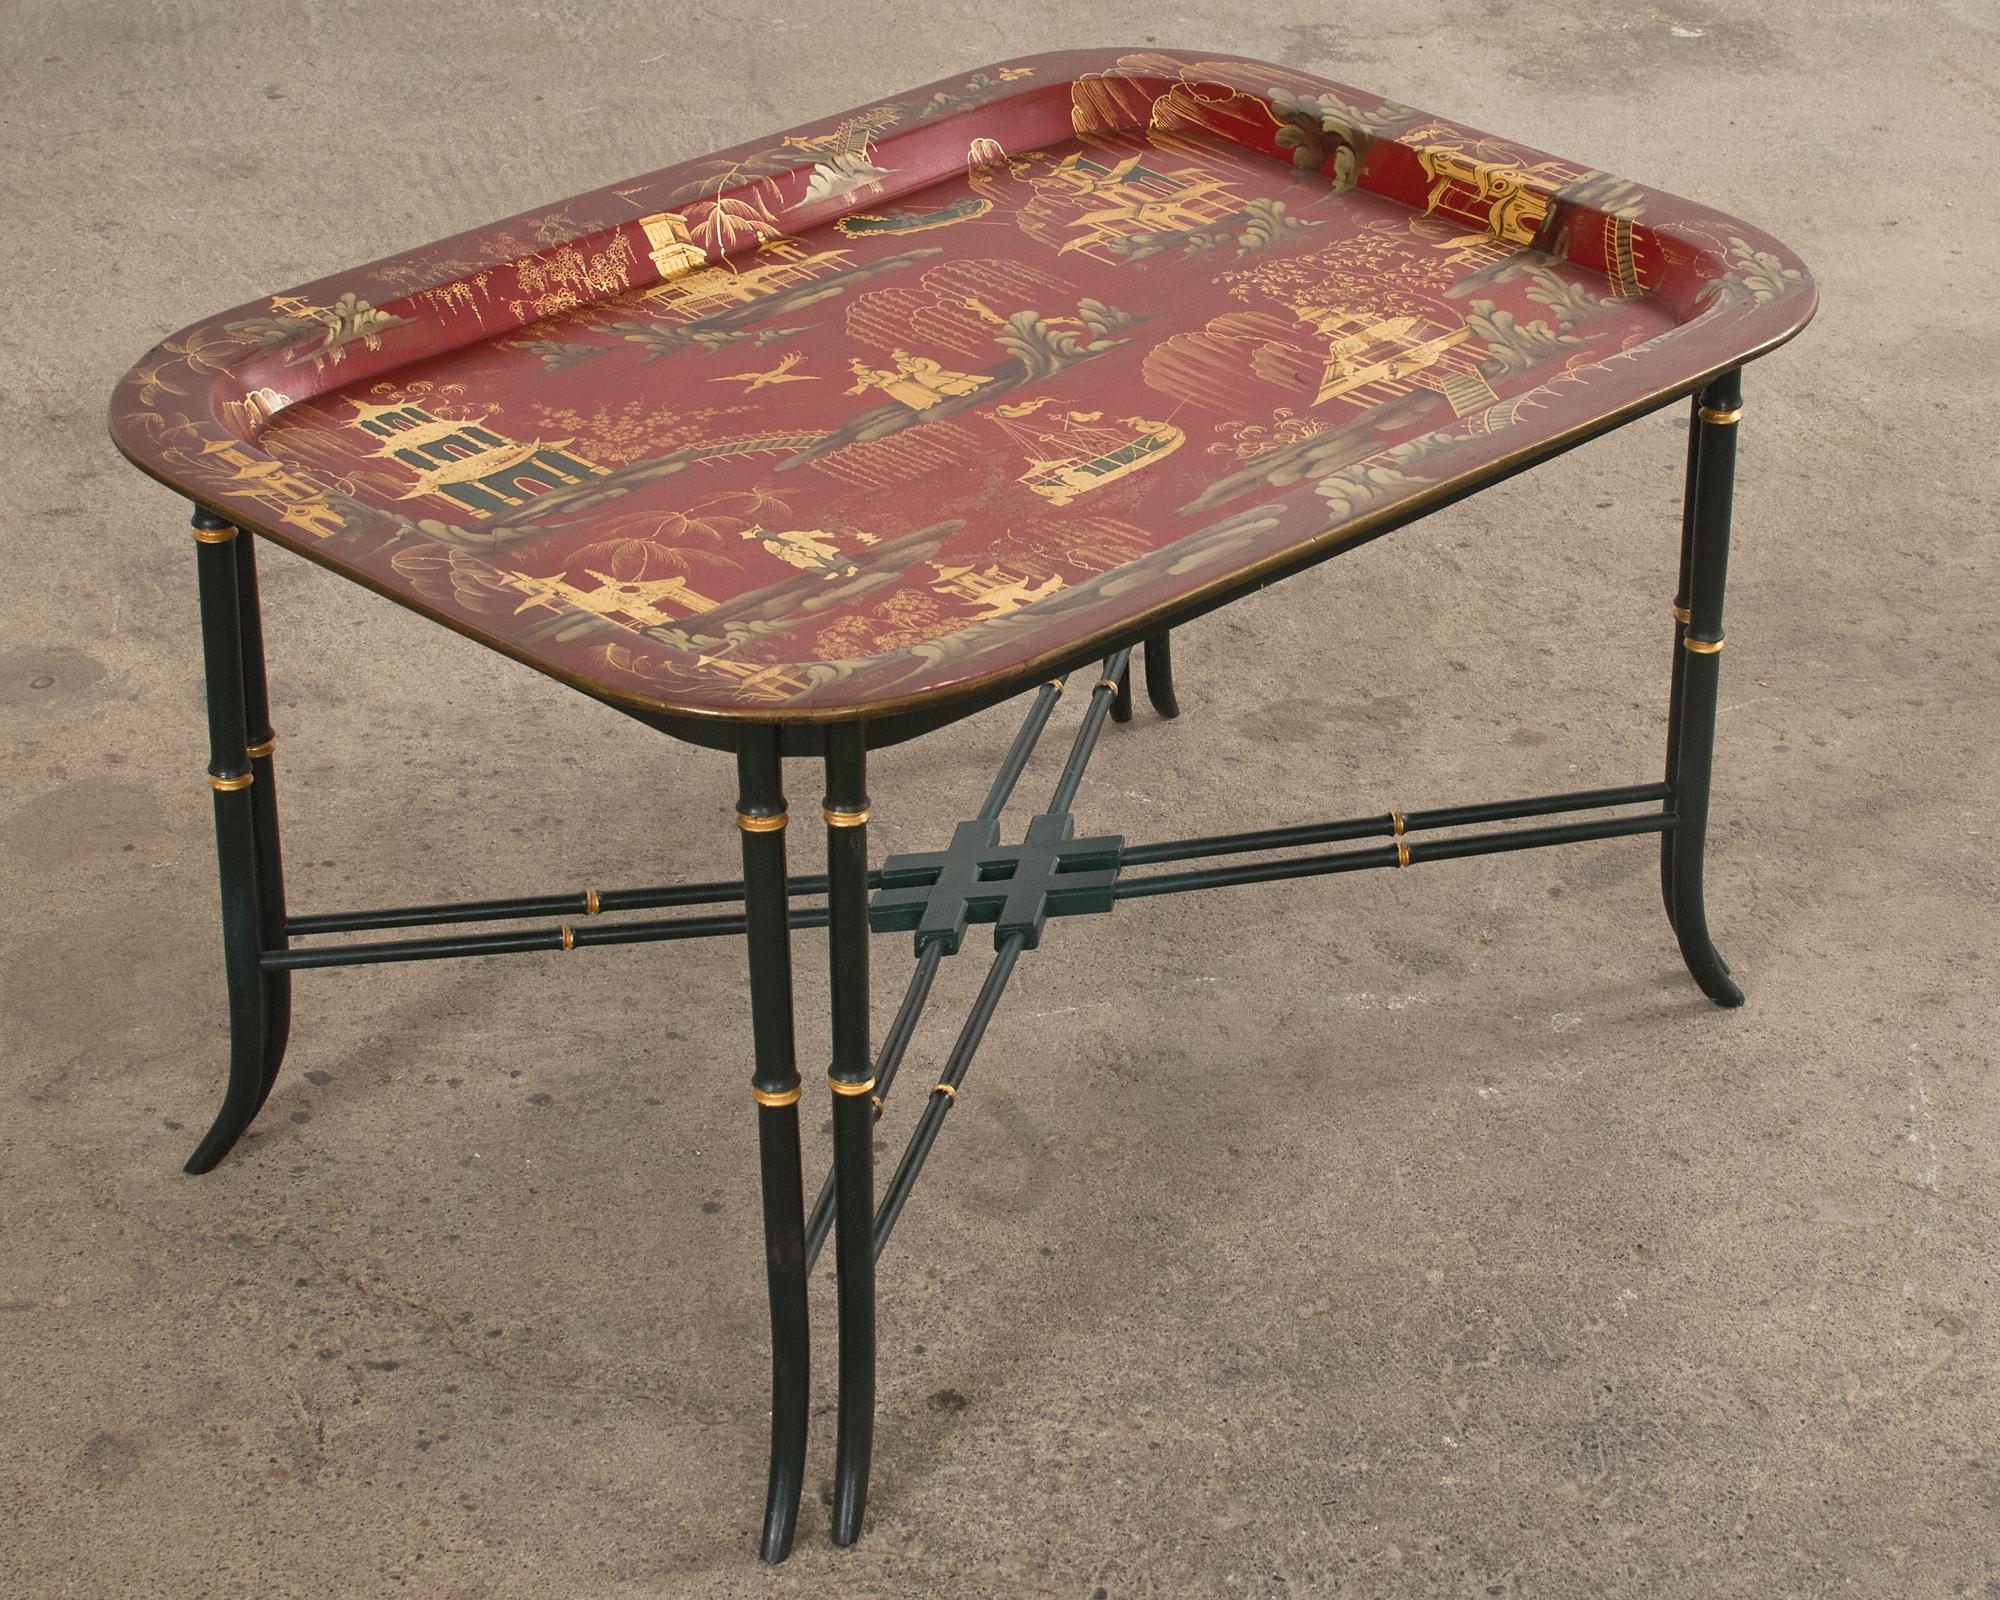 20th Century English Chinoiserie Style Faux Bamboo Lacquered Tray Table For Sale